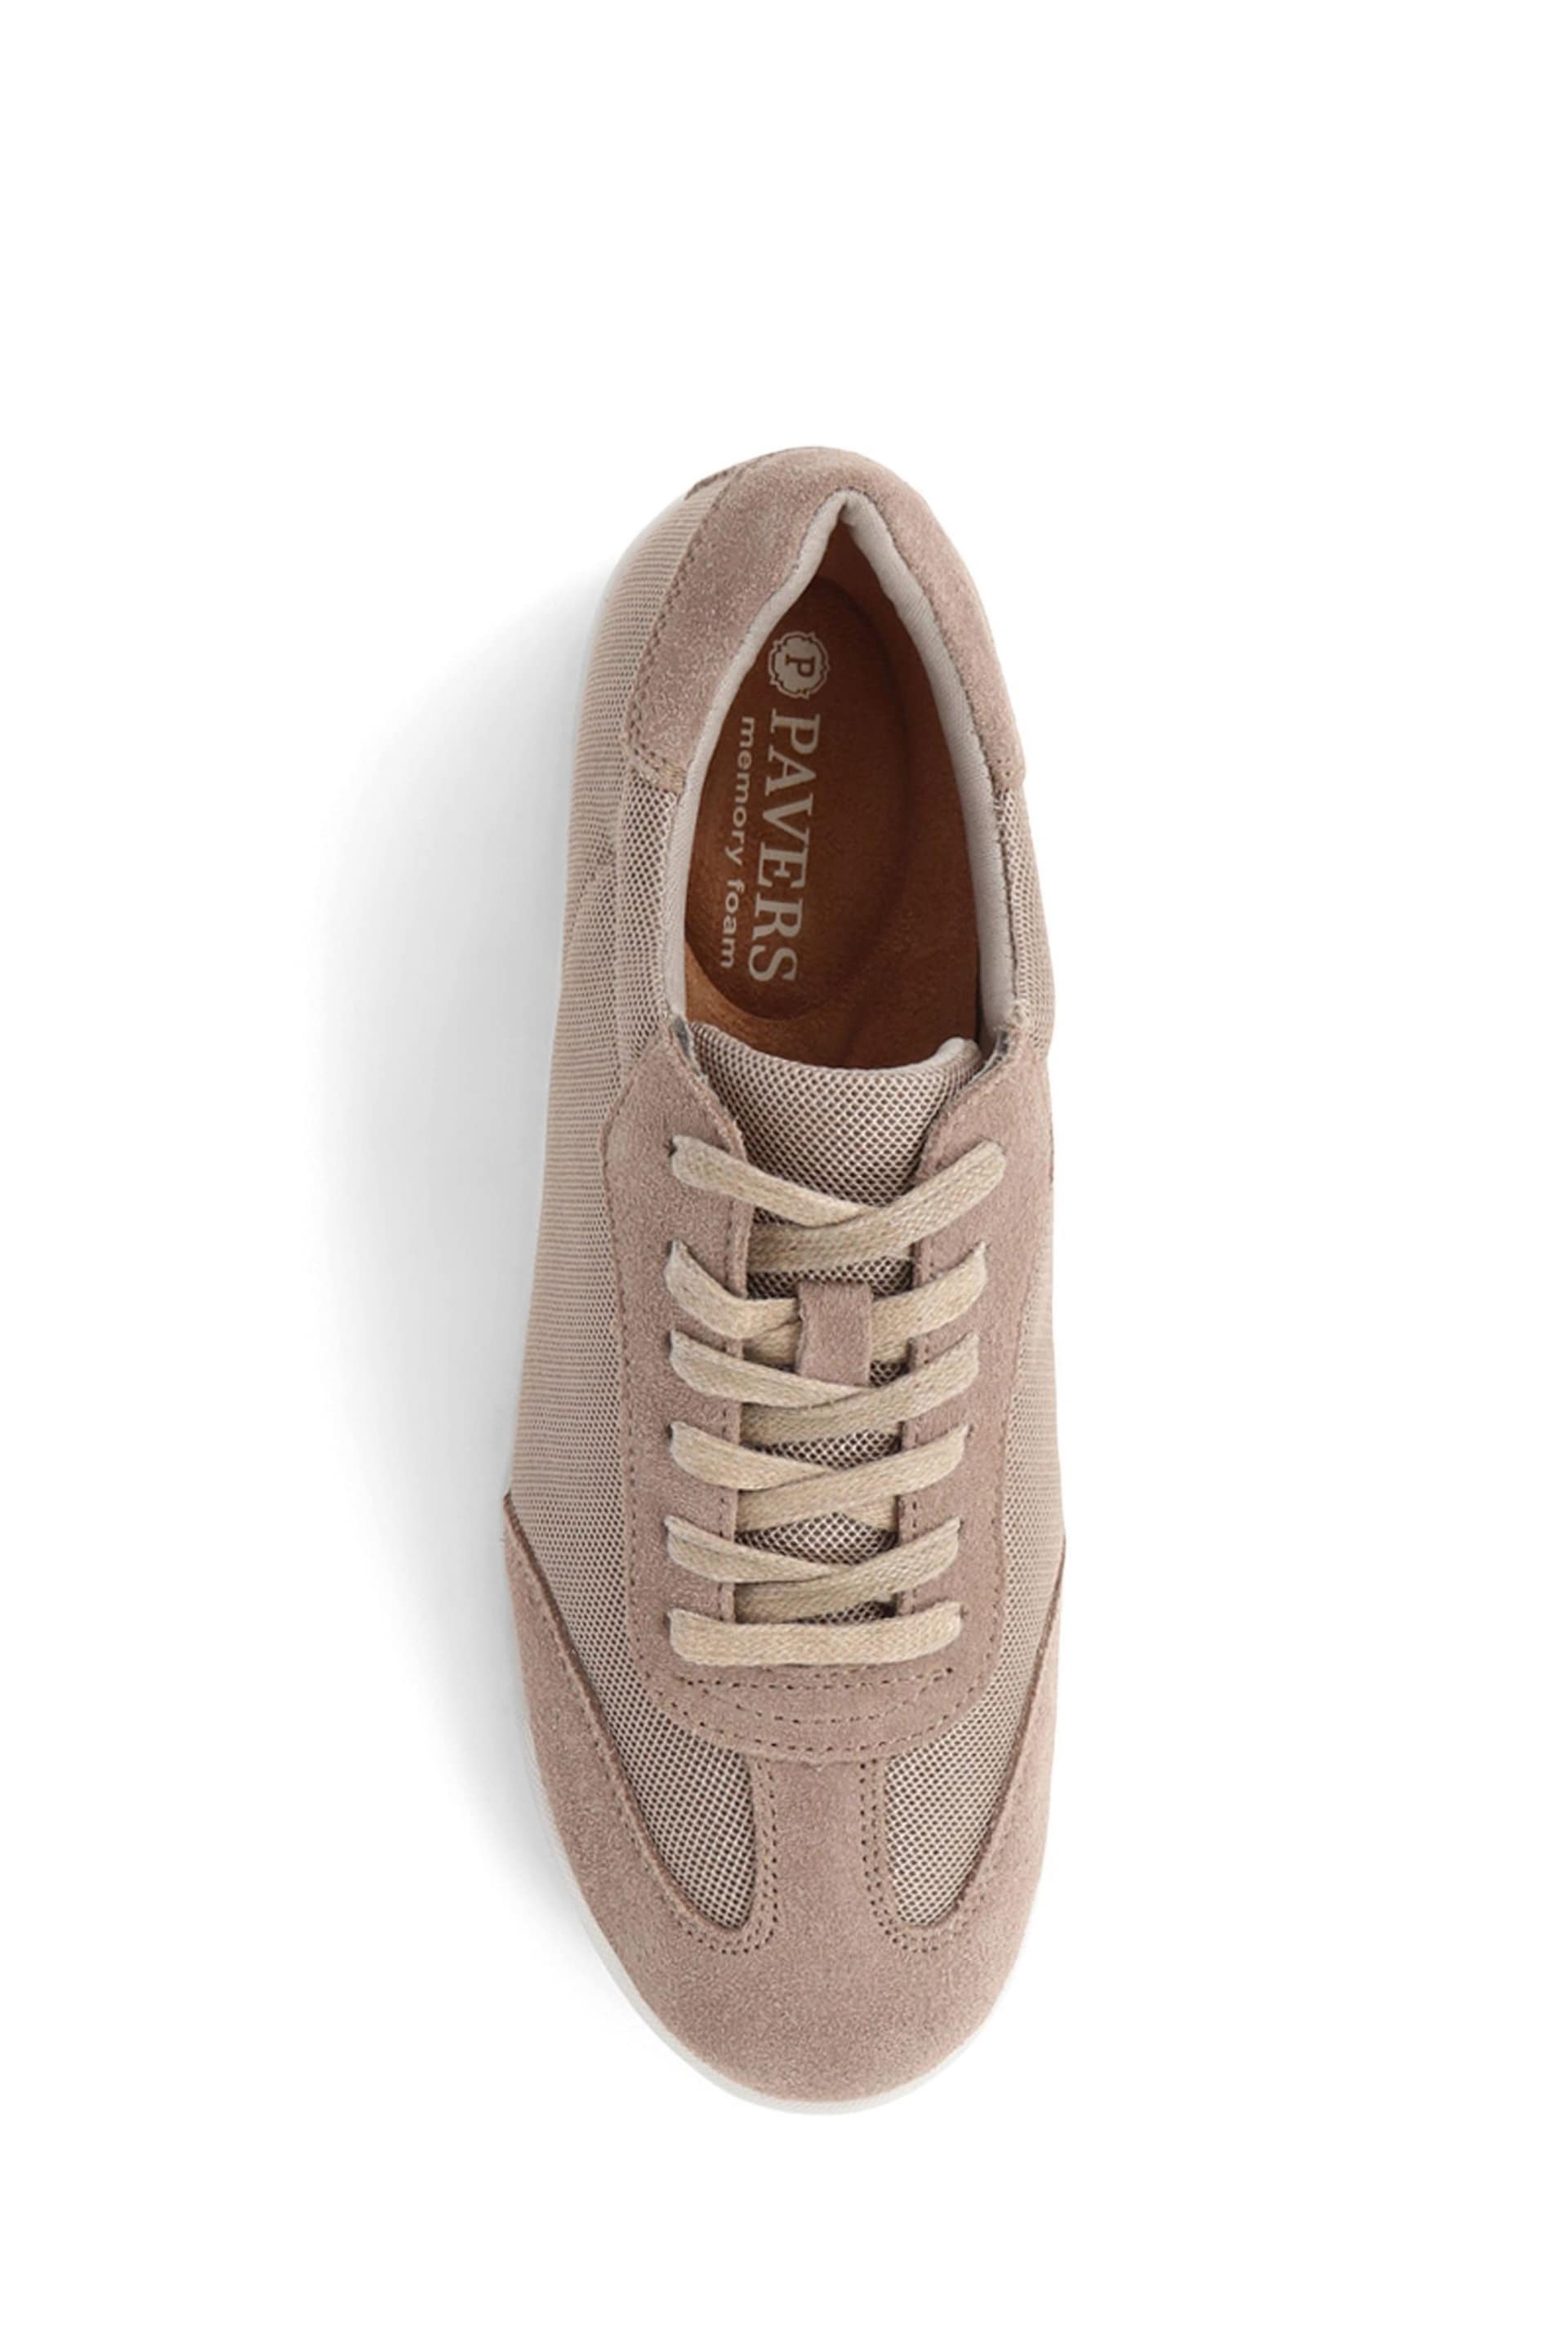 Pavers Natural Memory Foam Leather Trainers - Image 4 of 5